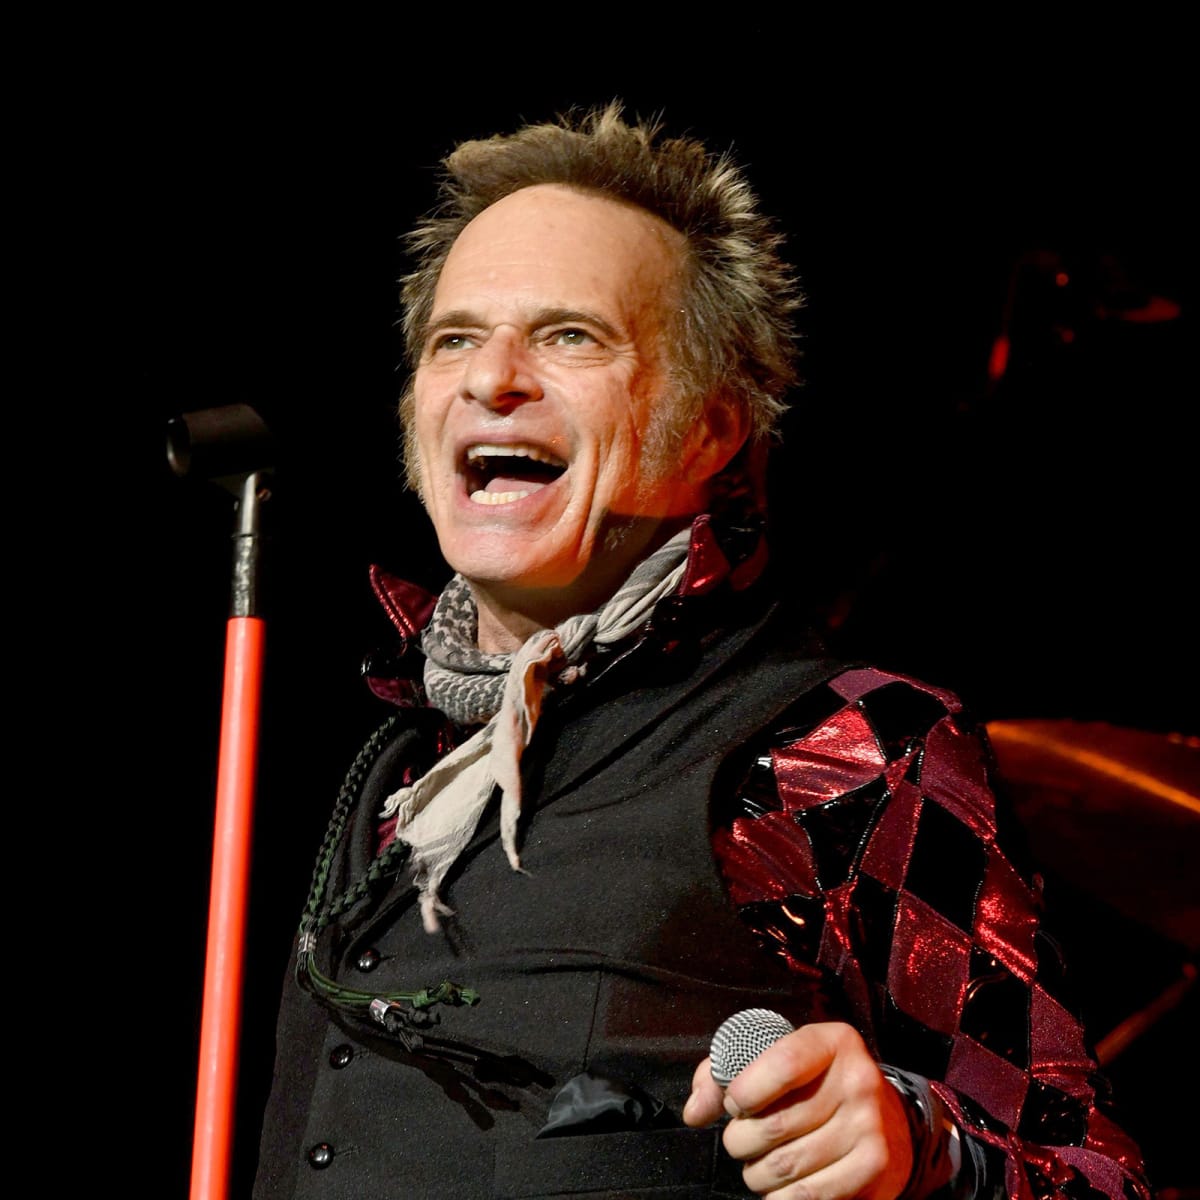 Hear David Lee Roth's new solo acoustic song 